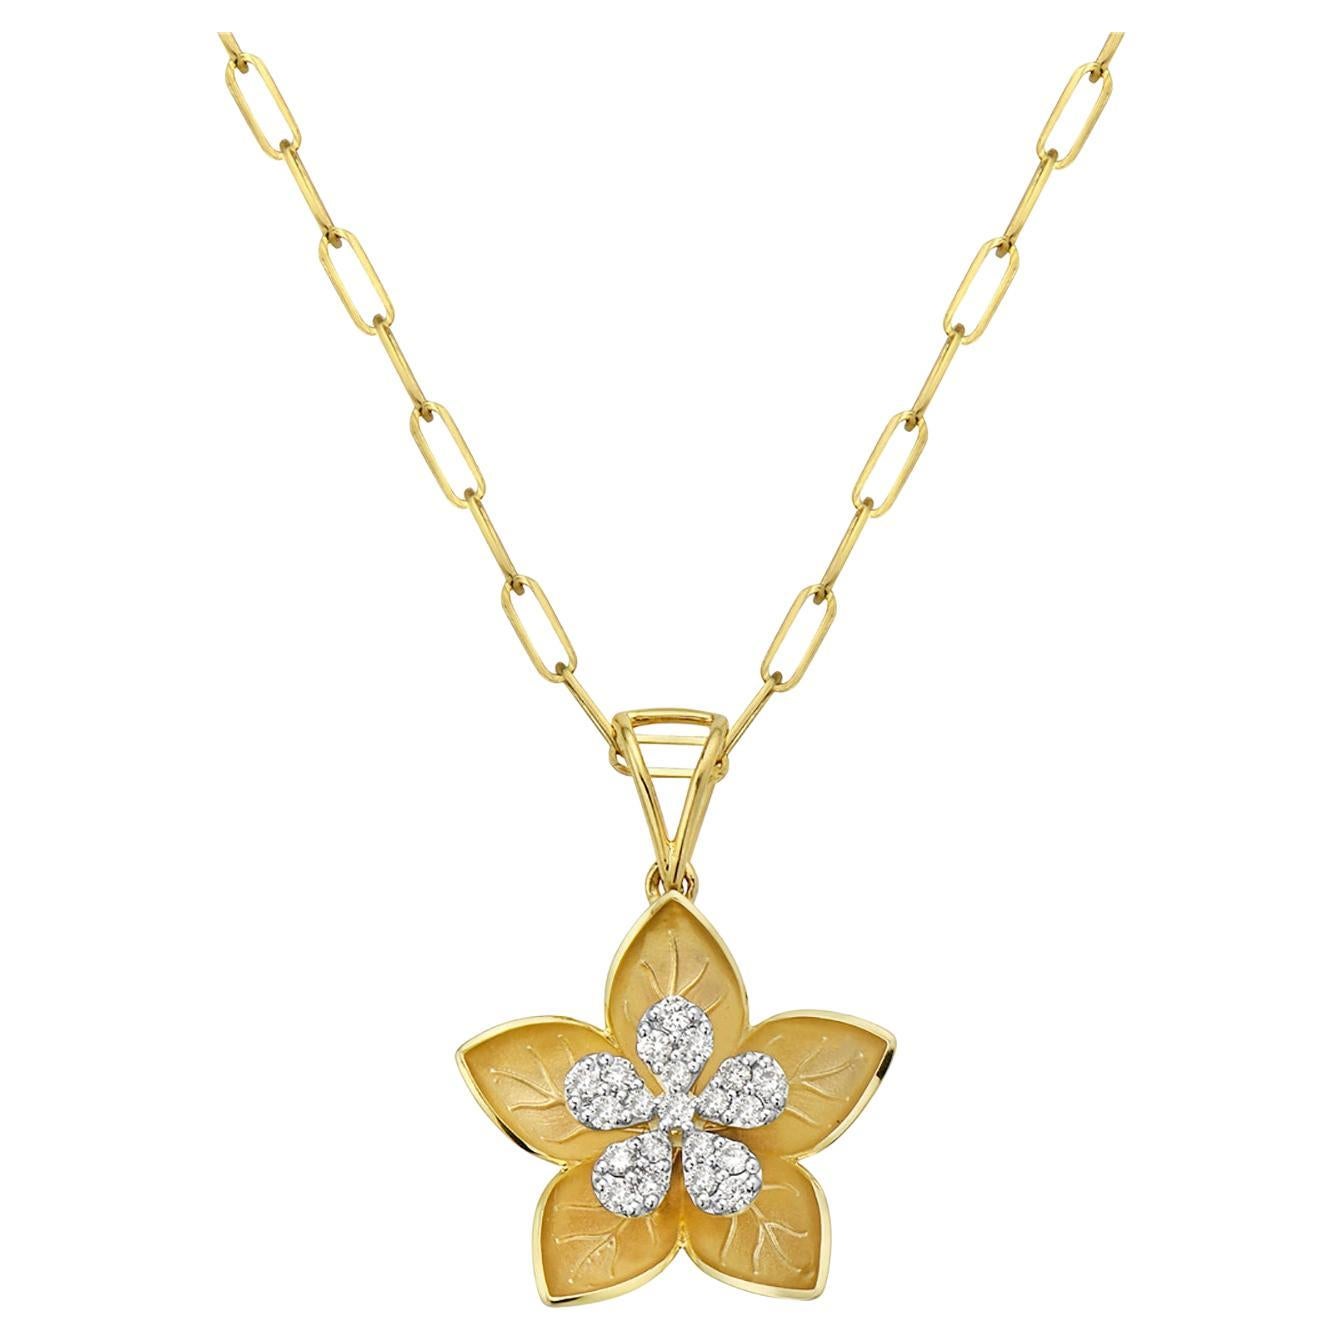 Carved Flower Shaped Pendant with Diamonds Made in 14k Yellow Gold